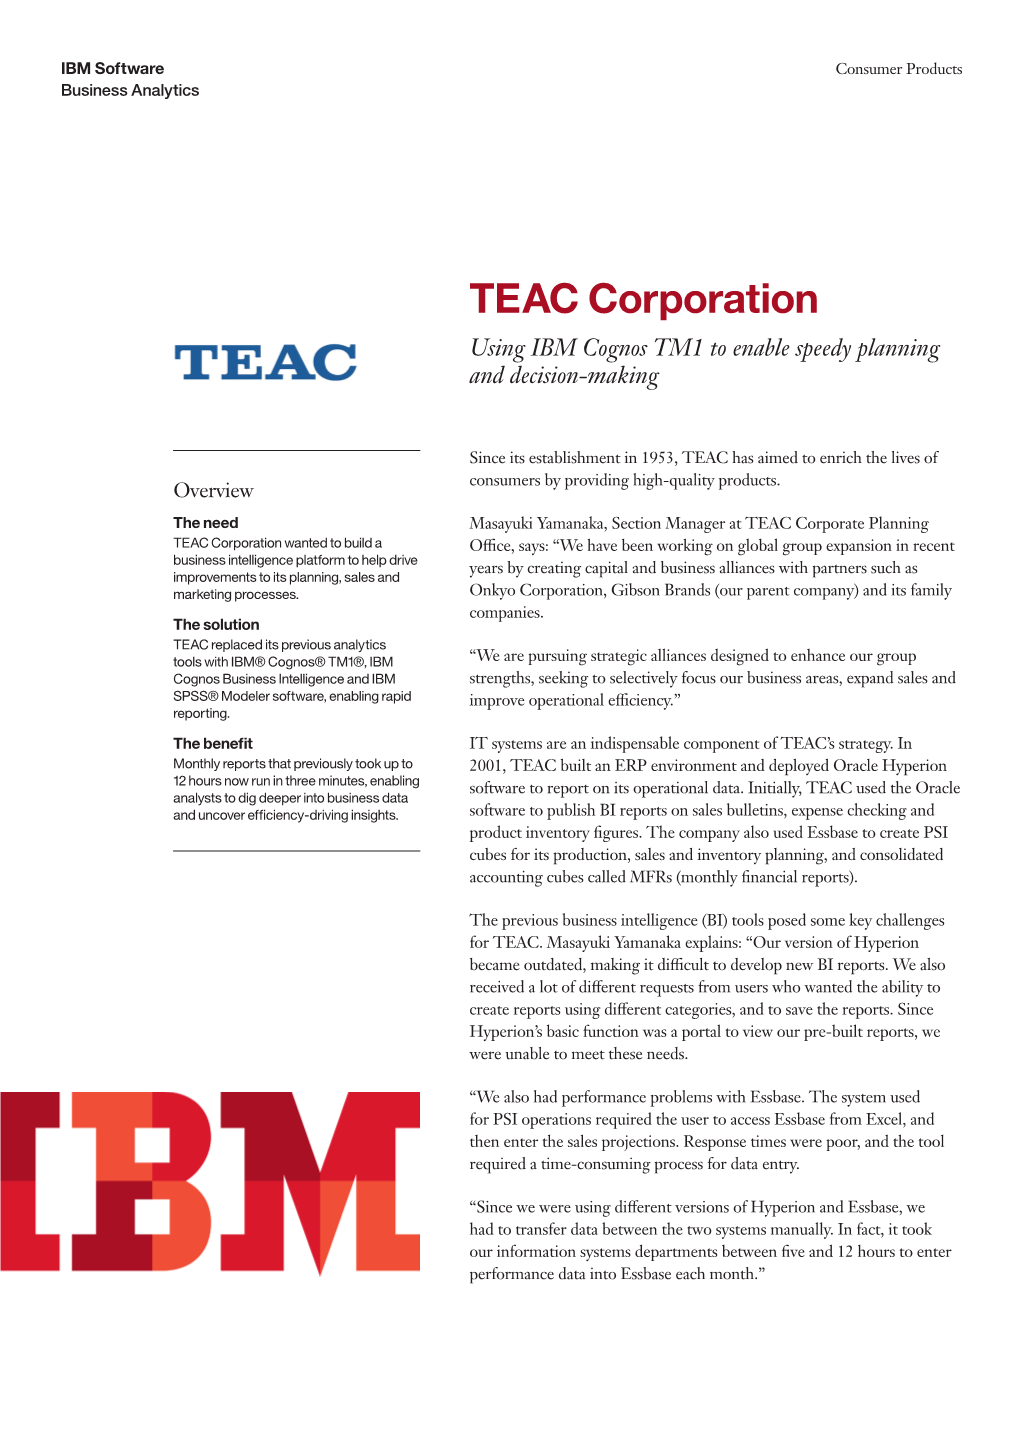 TEAC Corporation Using IBM Cognos TM1 to Enable Speedy Planning and Decision-Making